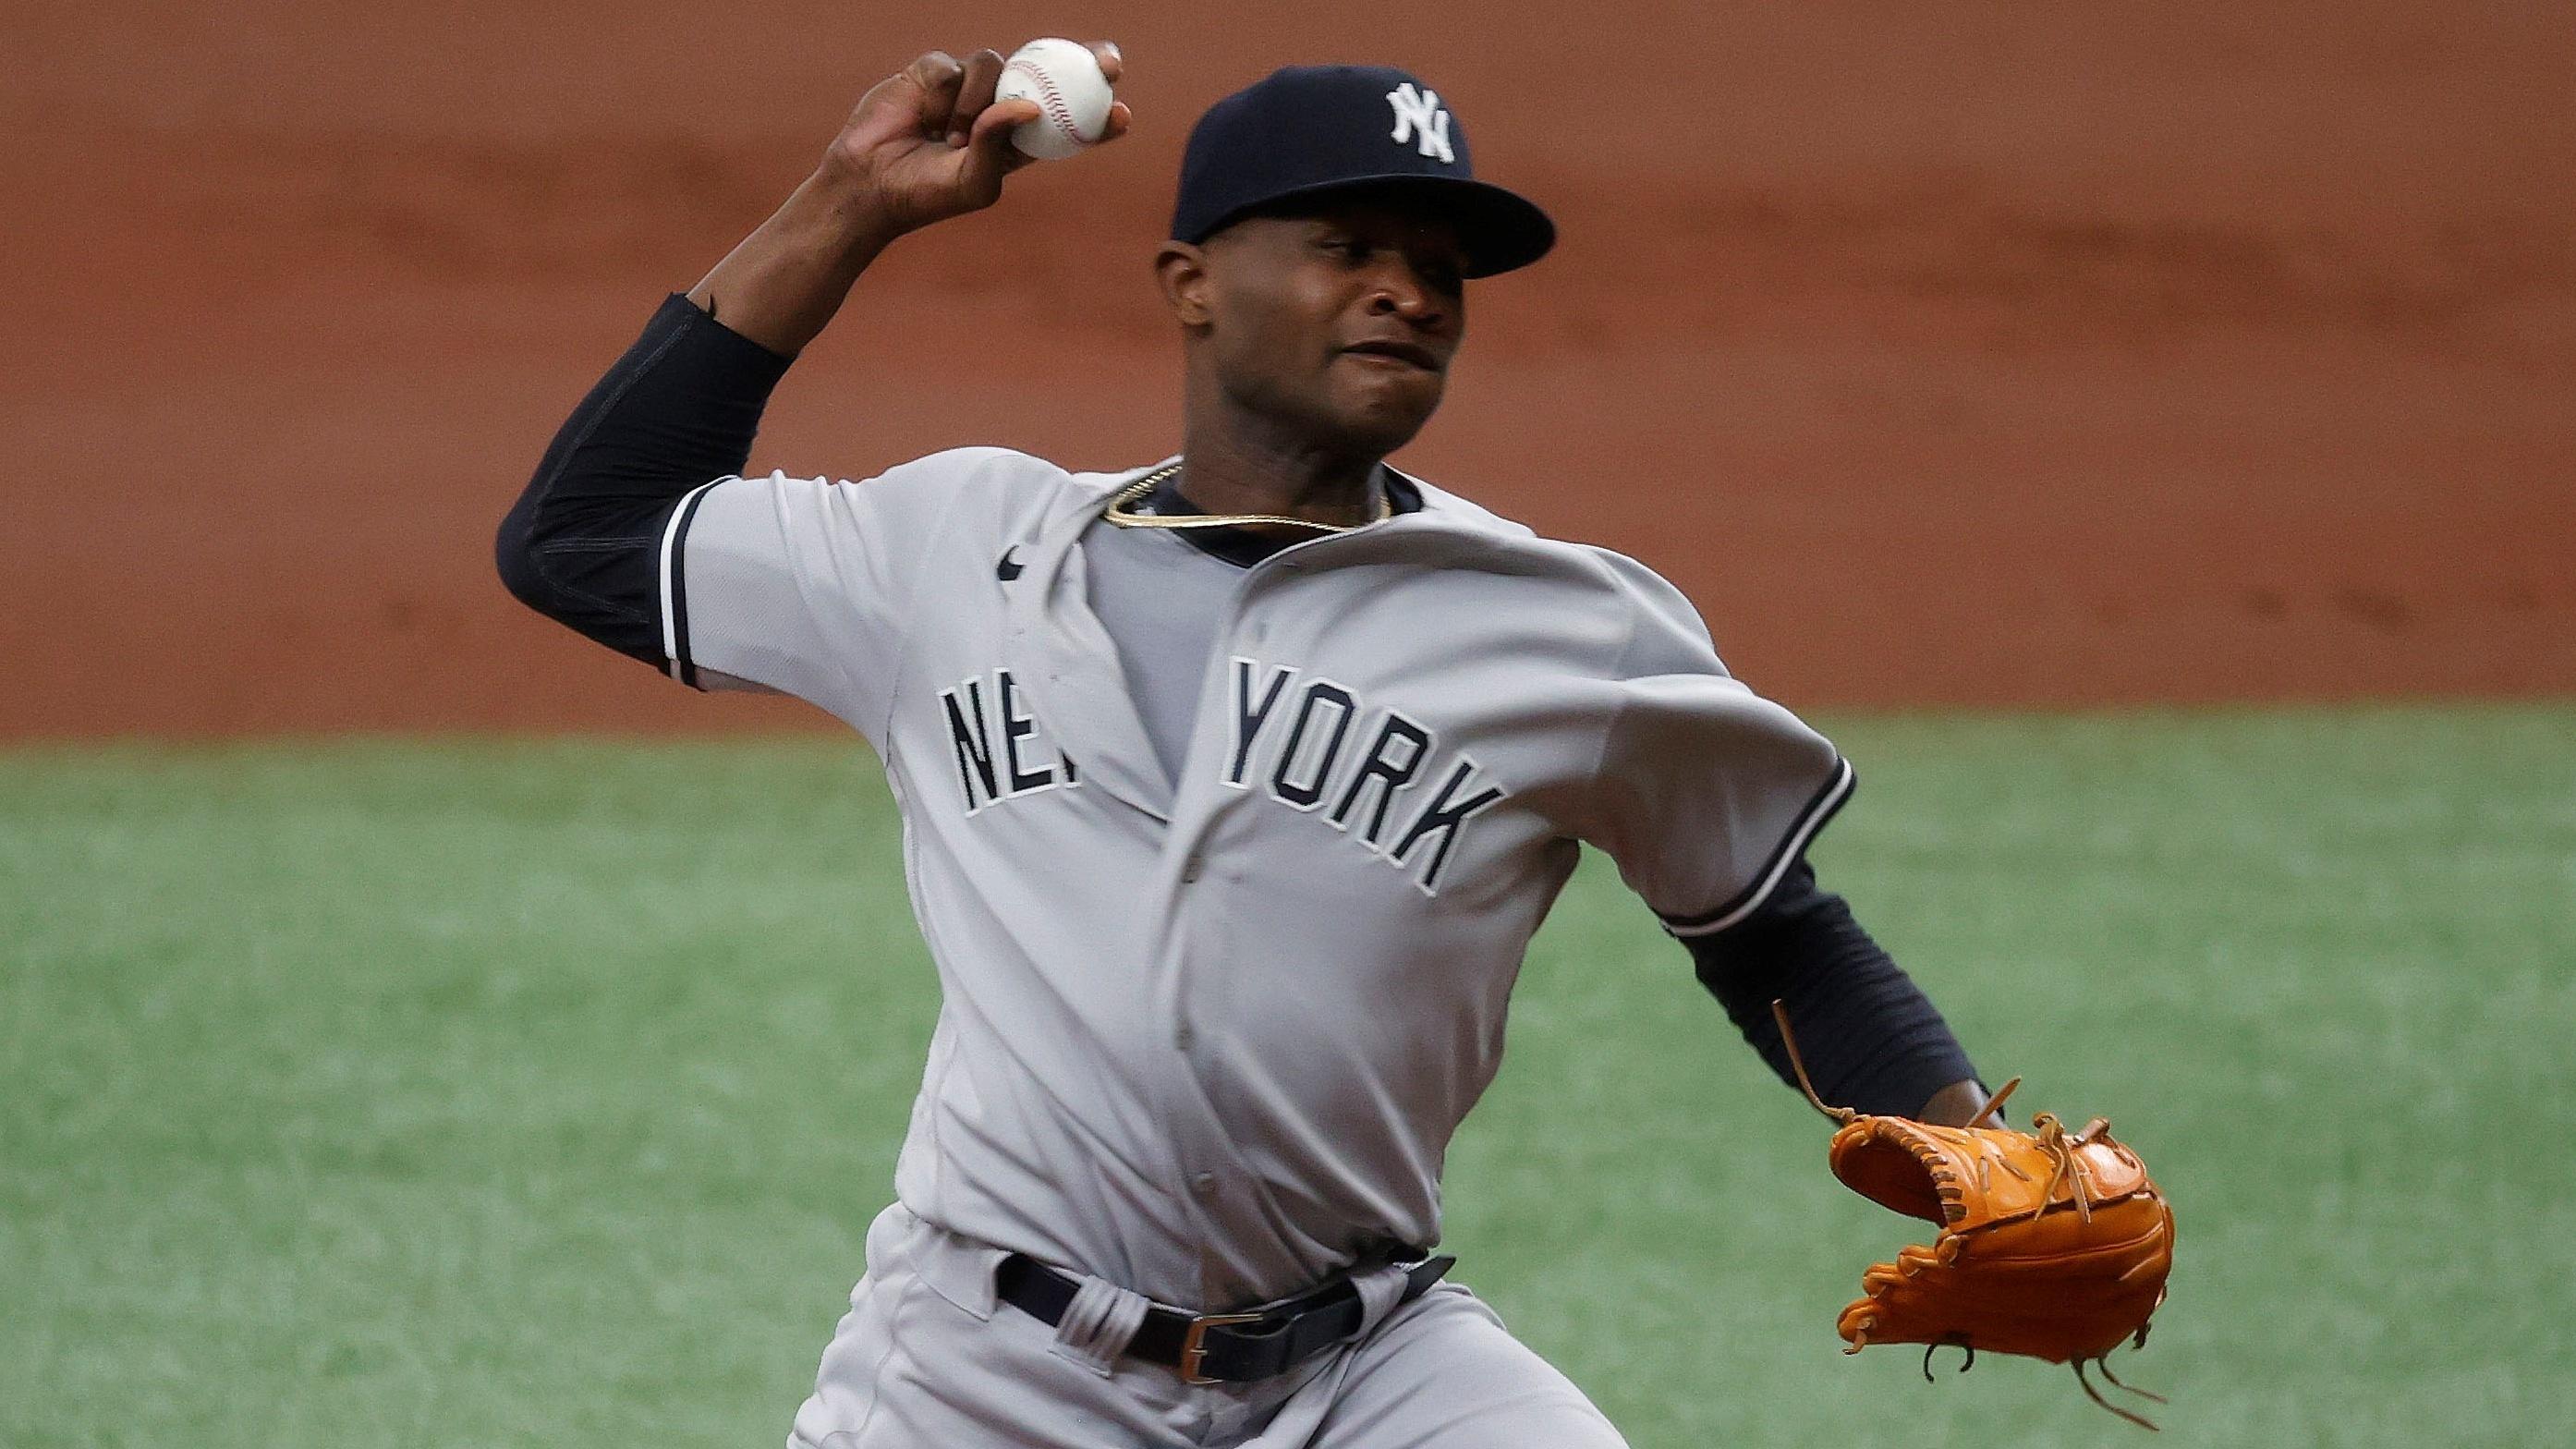 Apr 10, 2021; St. Petersburg, Florida, USA; New York Yankees starting pitcher Domingo German (55) throws a pitch during the first inning against the Tampa Bay Rays at Tropicana Field. / Kim Klement-USA TODAY Sports